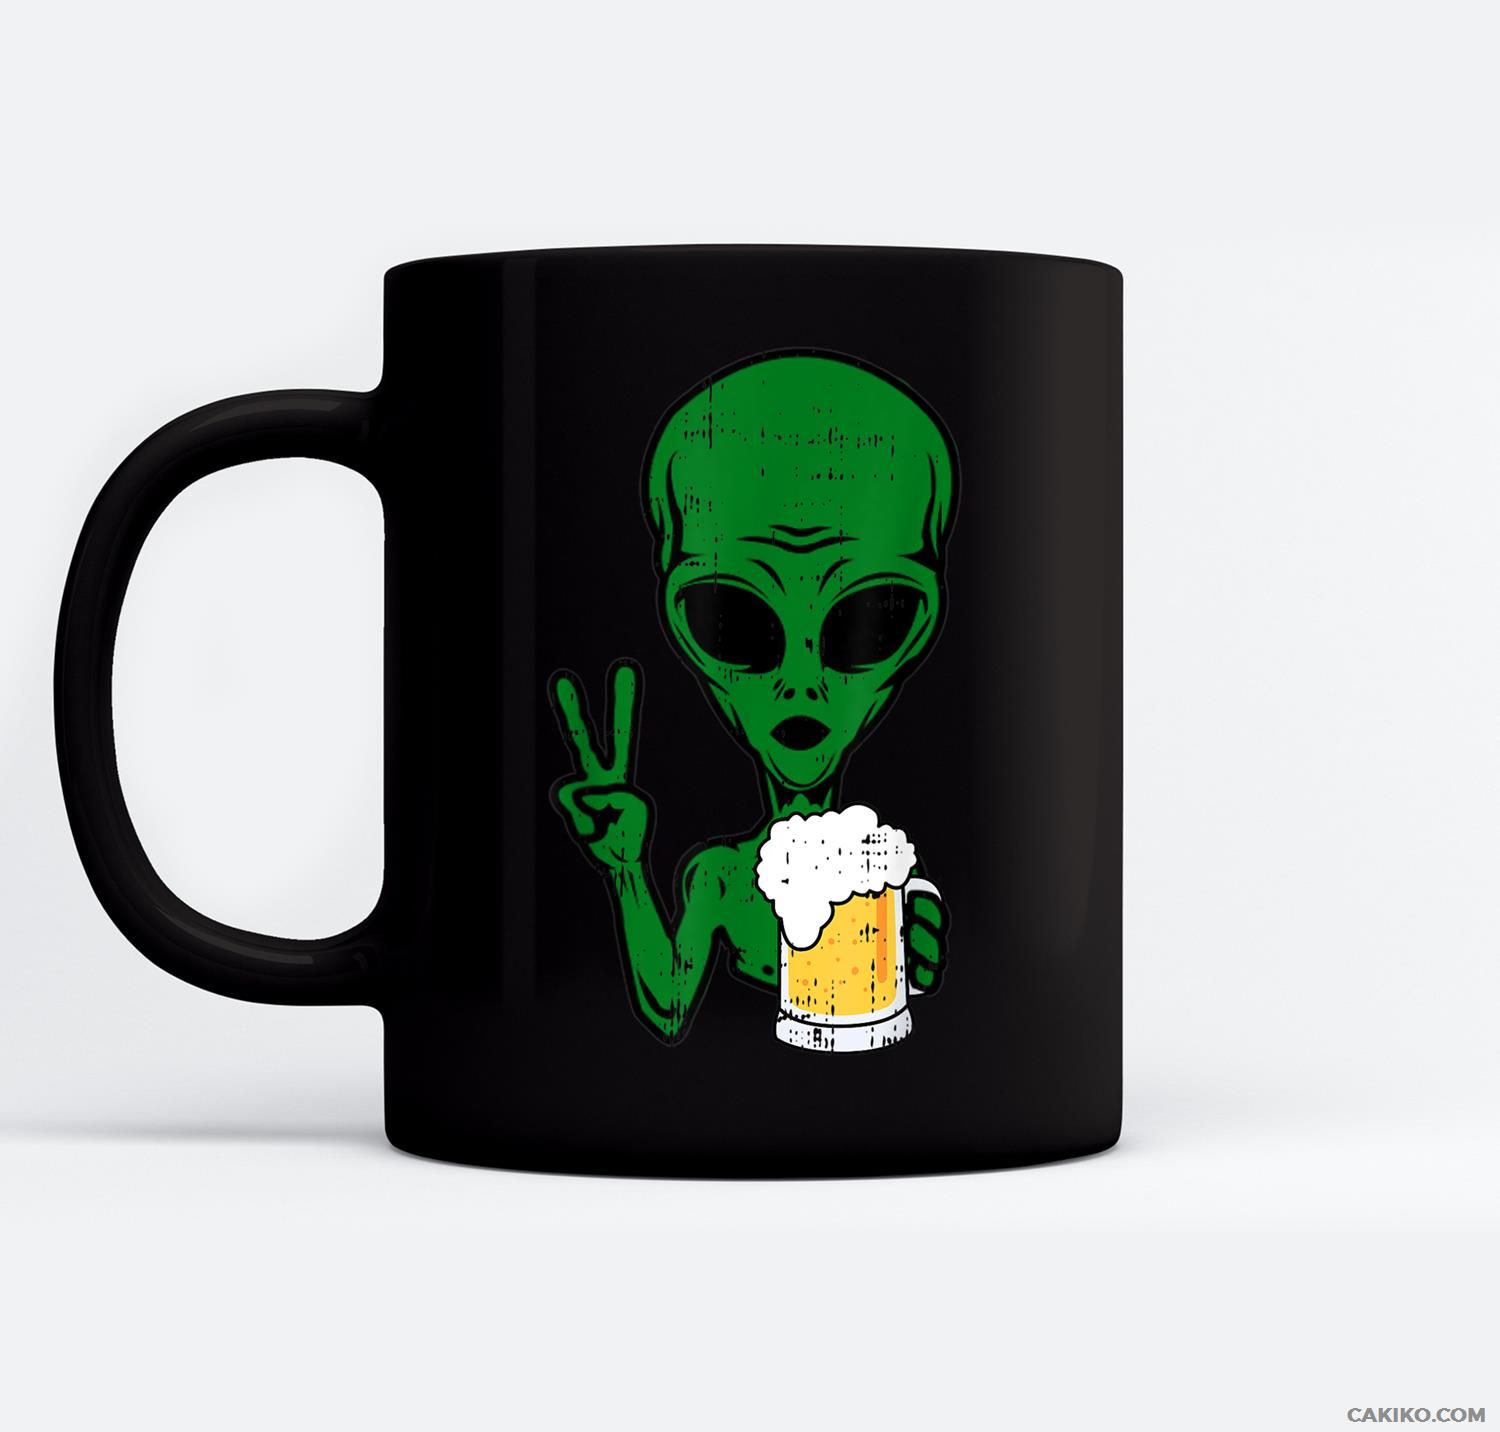 Area-51 Alien Beer Peace Sign Lazy Drinking Halloween Gift Ceramic Coffee Black Mugs